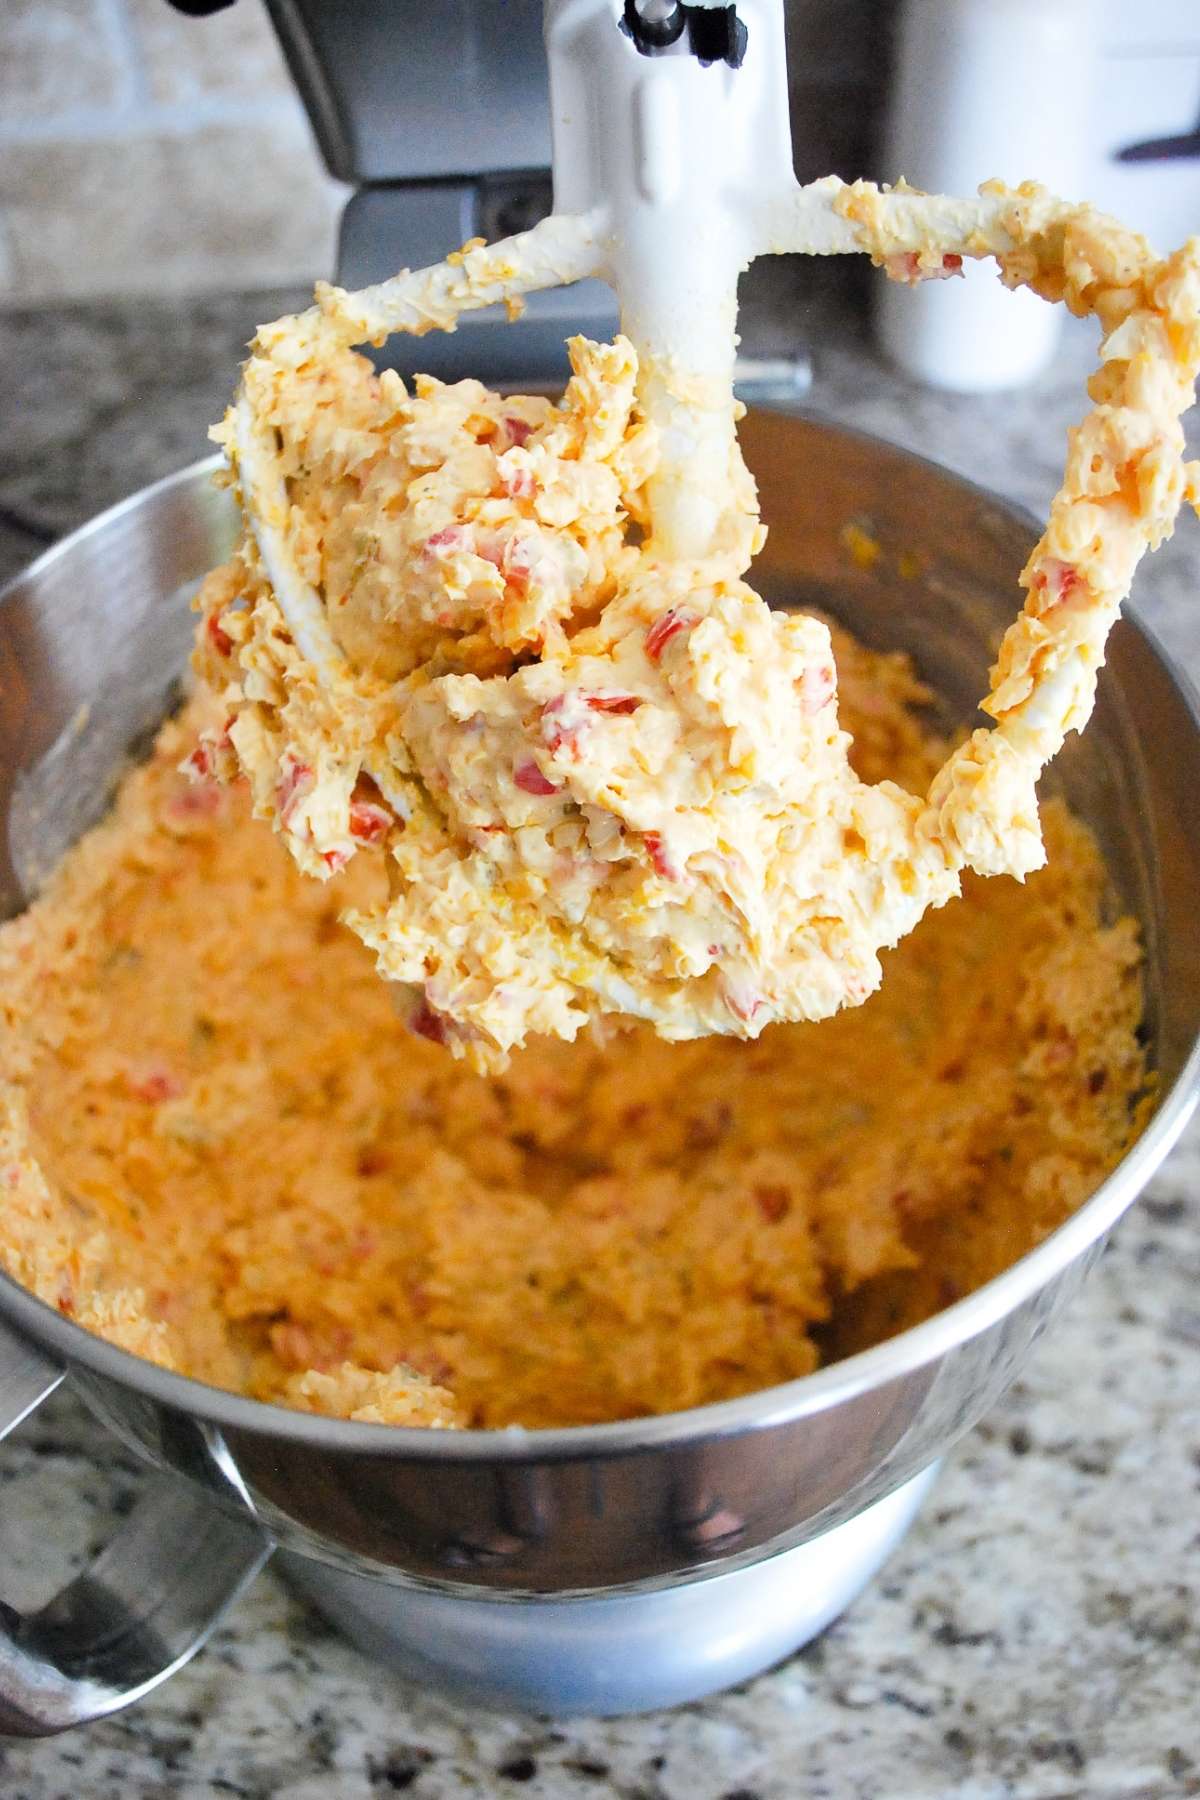 Pimento cheese blended in a stand mixer